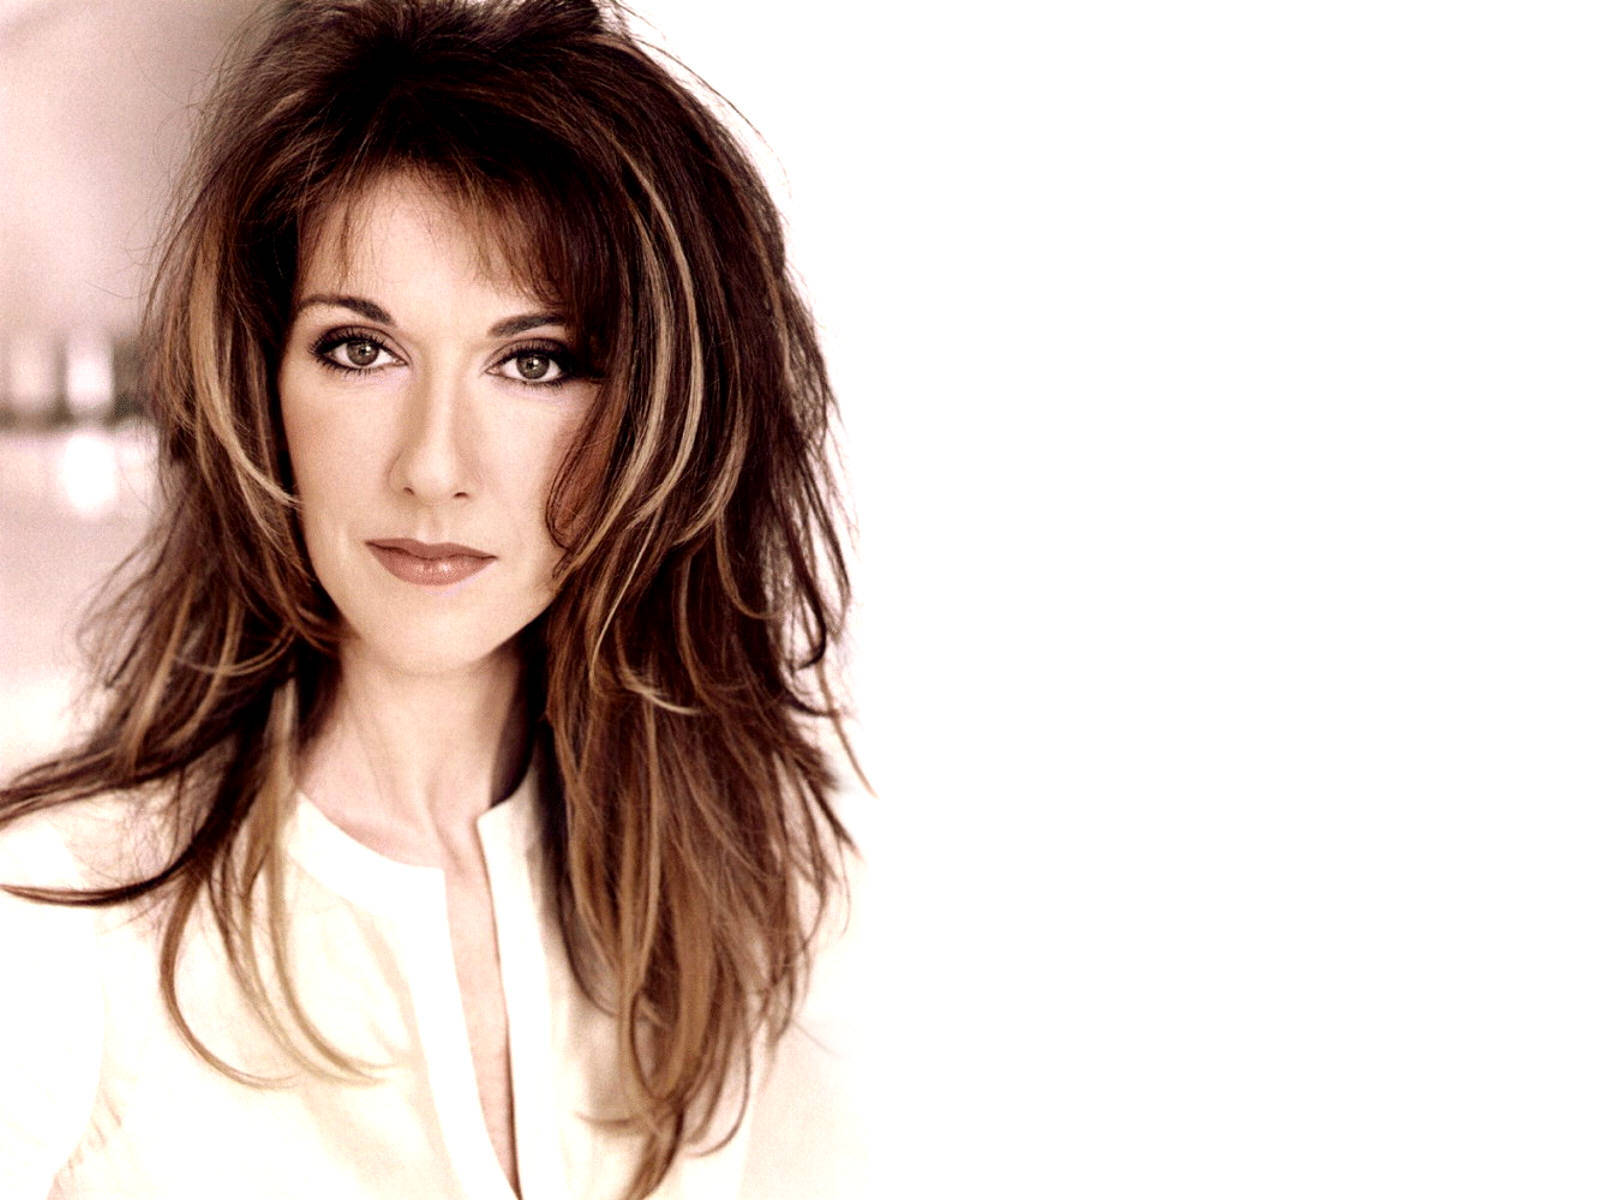 Beautiful Celine Dion On White Background